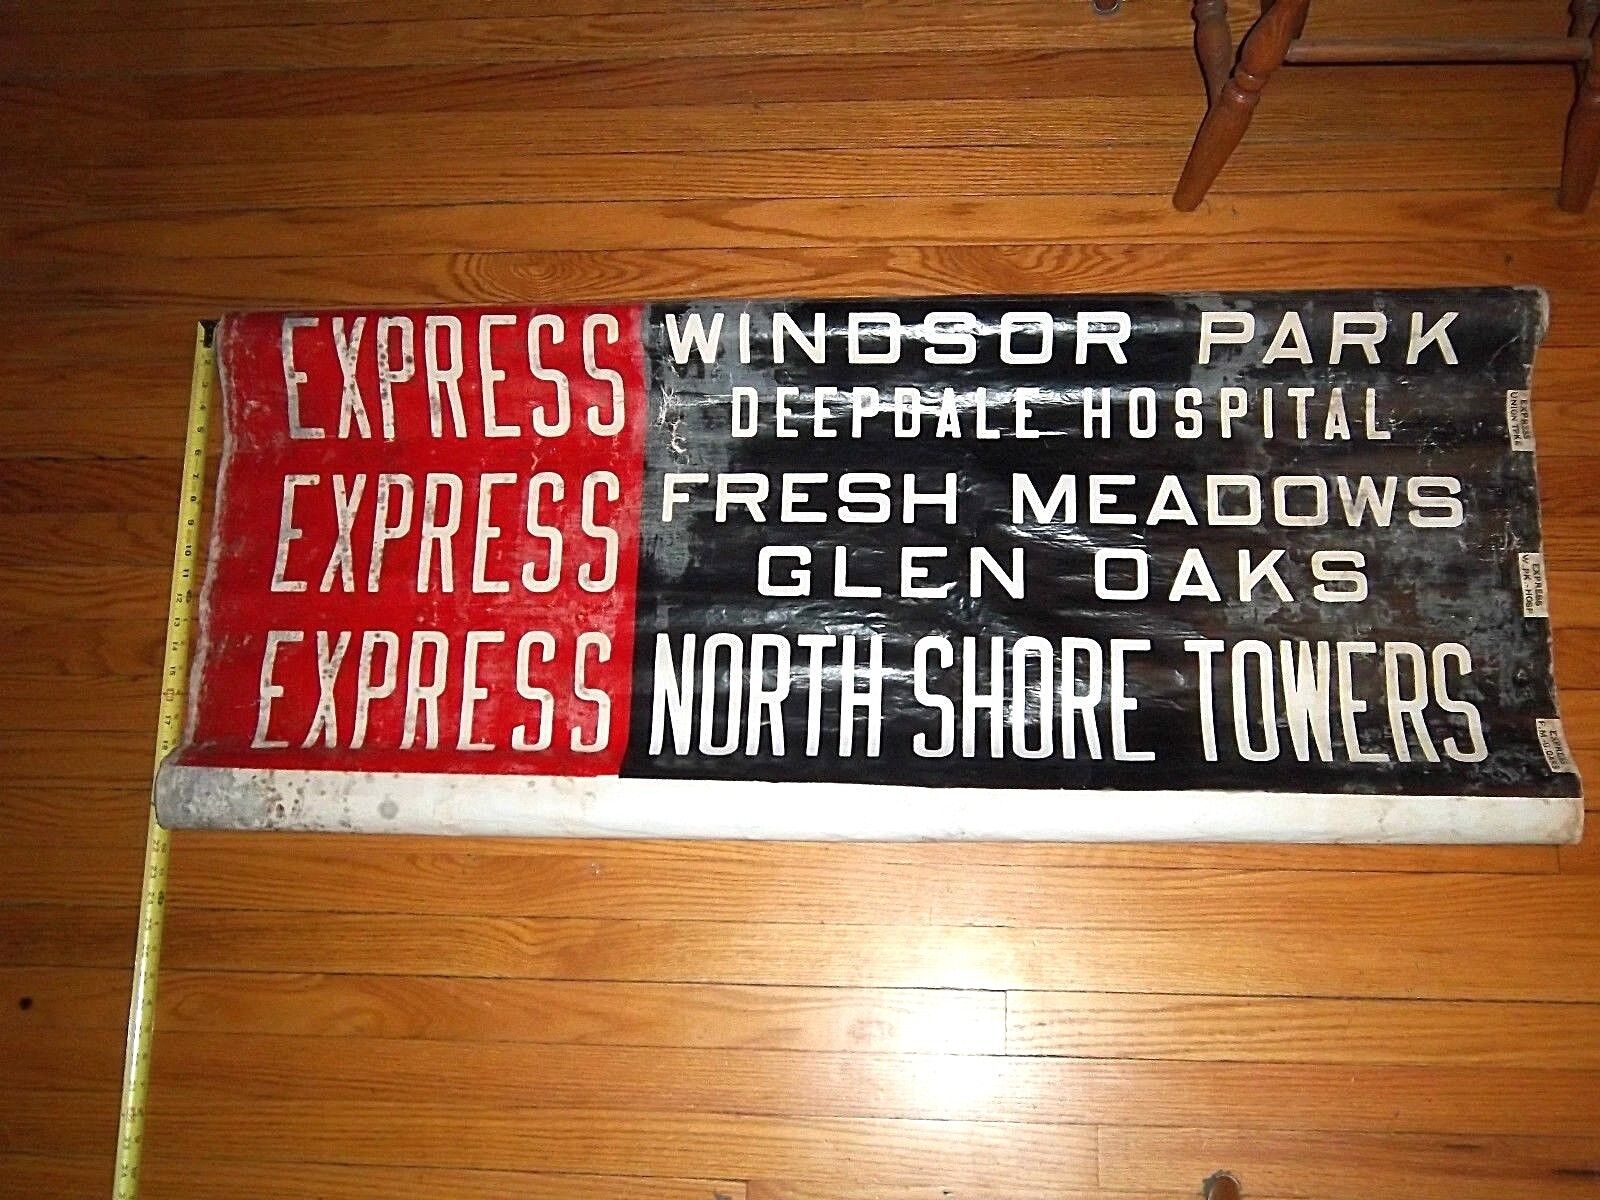 NY NYC BUS ROLL SIGN WINDSOR UNION TURNPIKE DEEPDALE HOSPITAL NORTH SHORE TOWERS